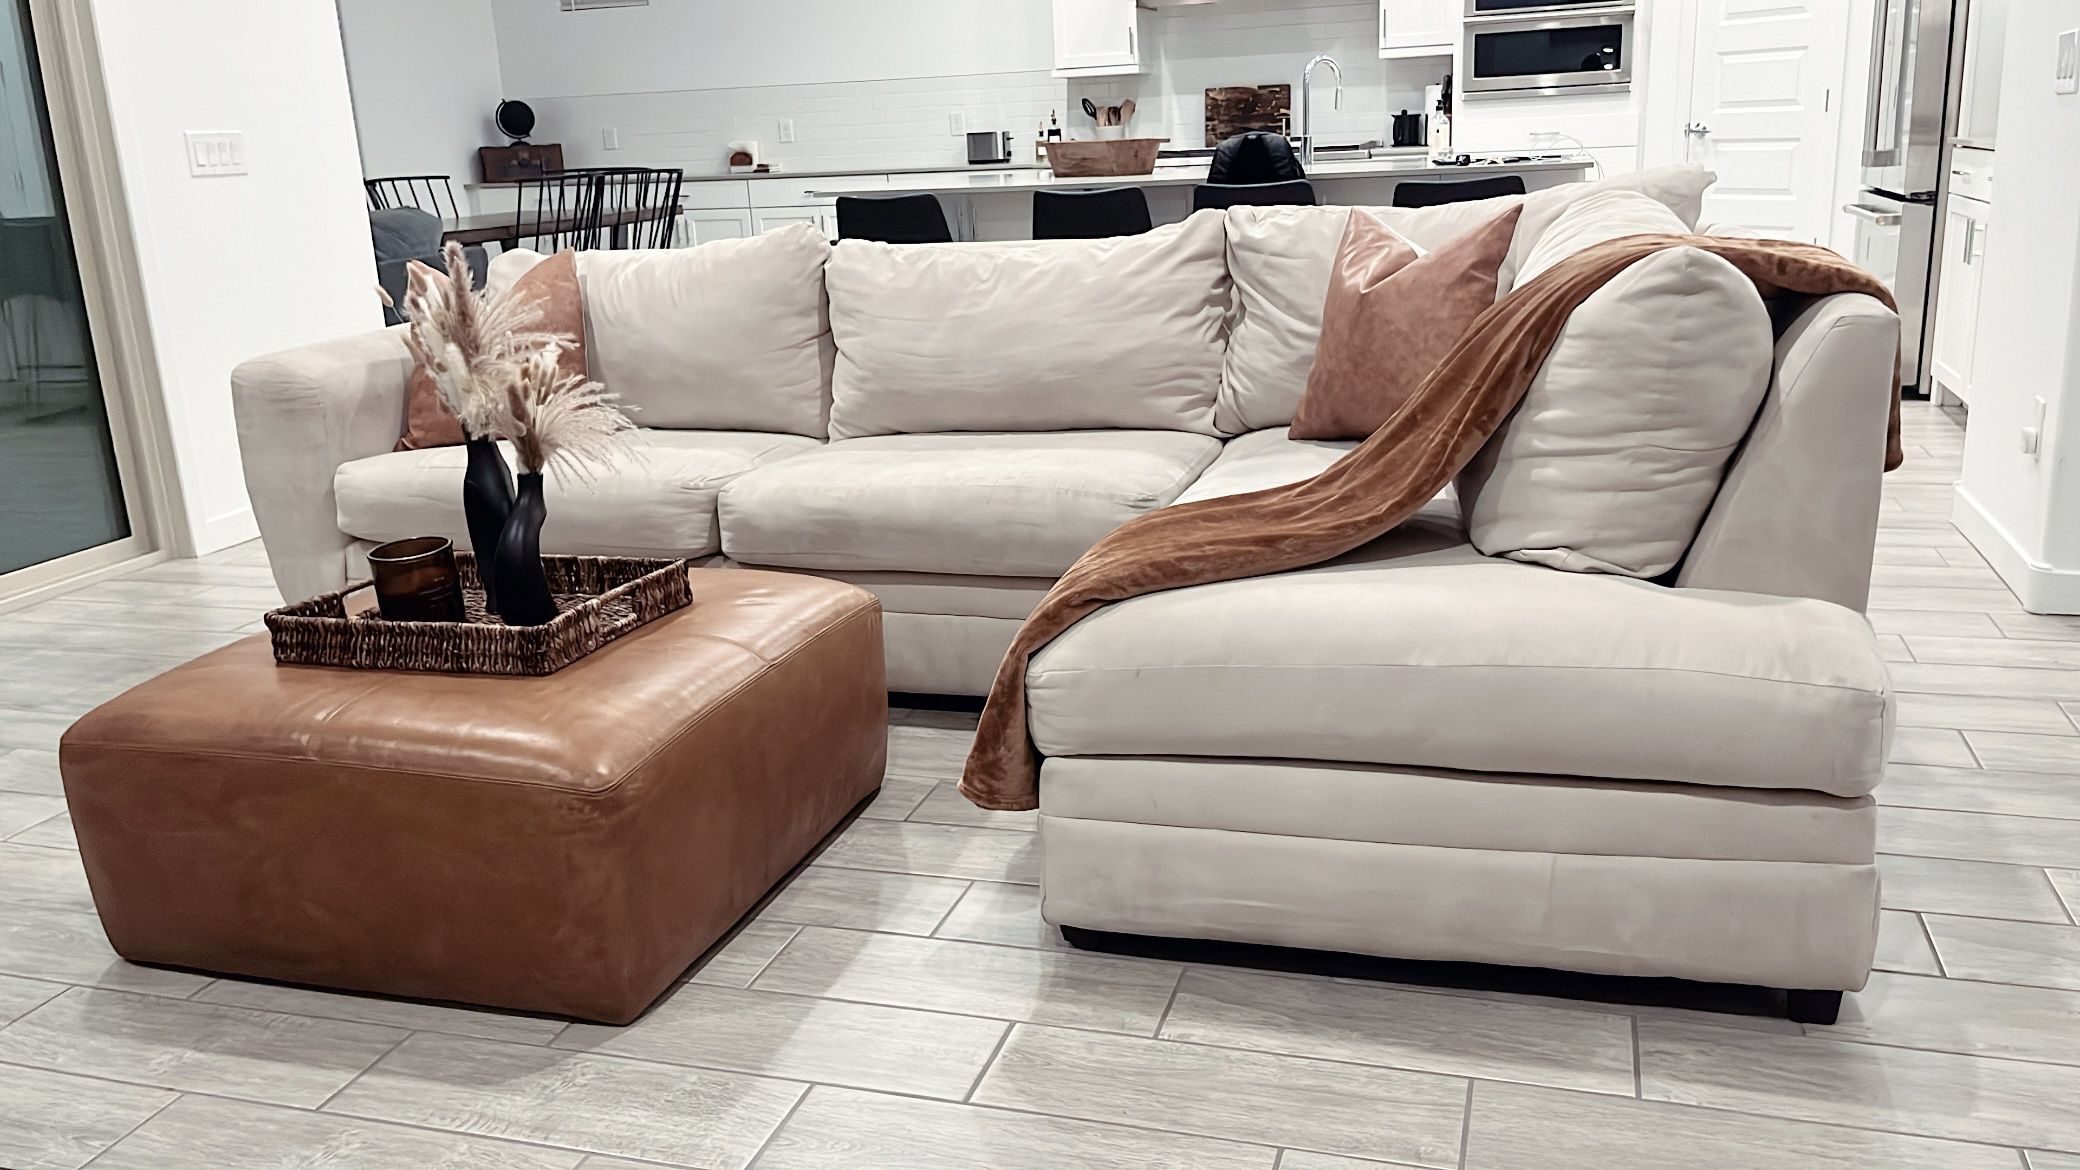 Cream L-shaped Right Arm Chaise Sectional Couch 